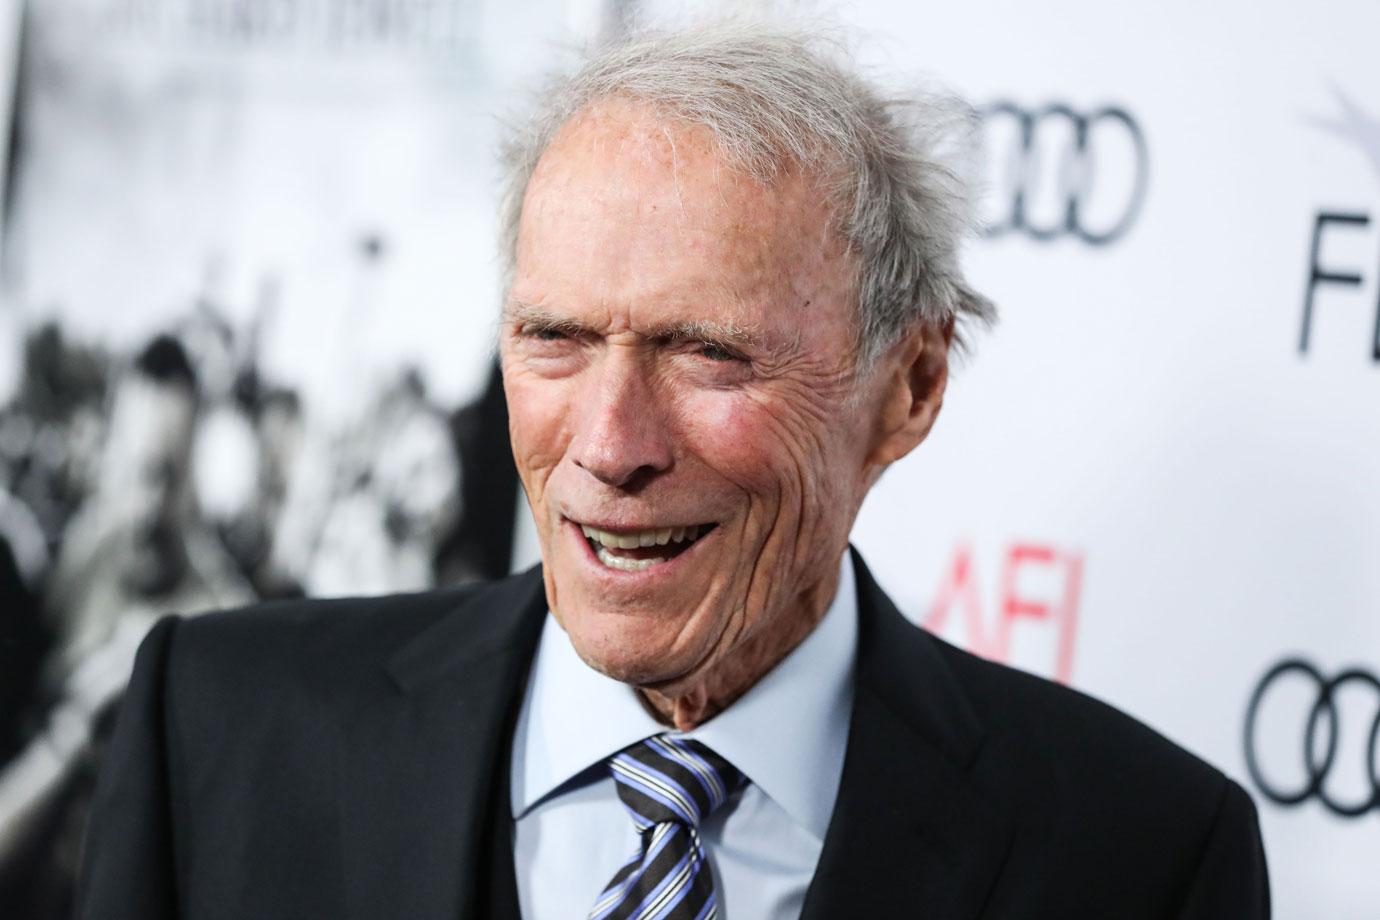 Clint Eastwood Celebs With Multiple Baby Mamas: Offset, Mick Jagger And More